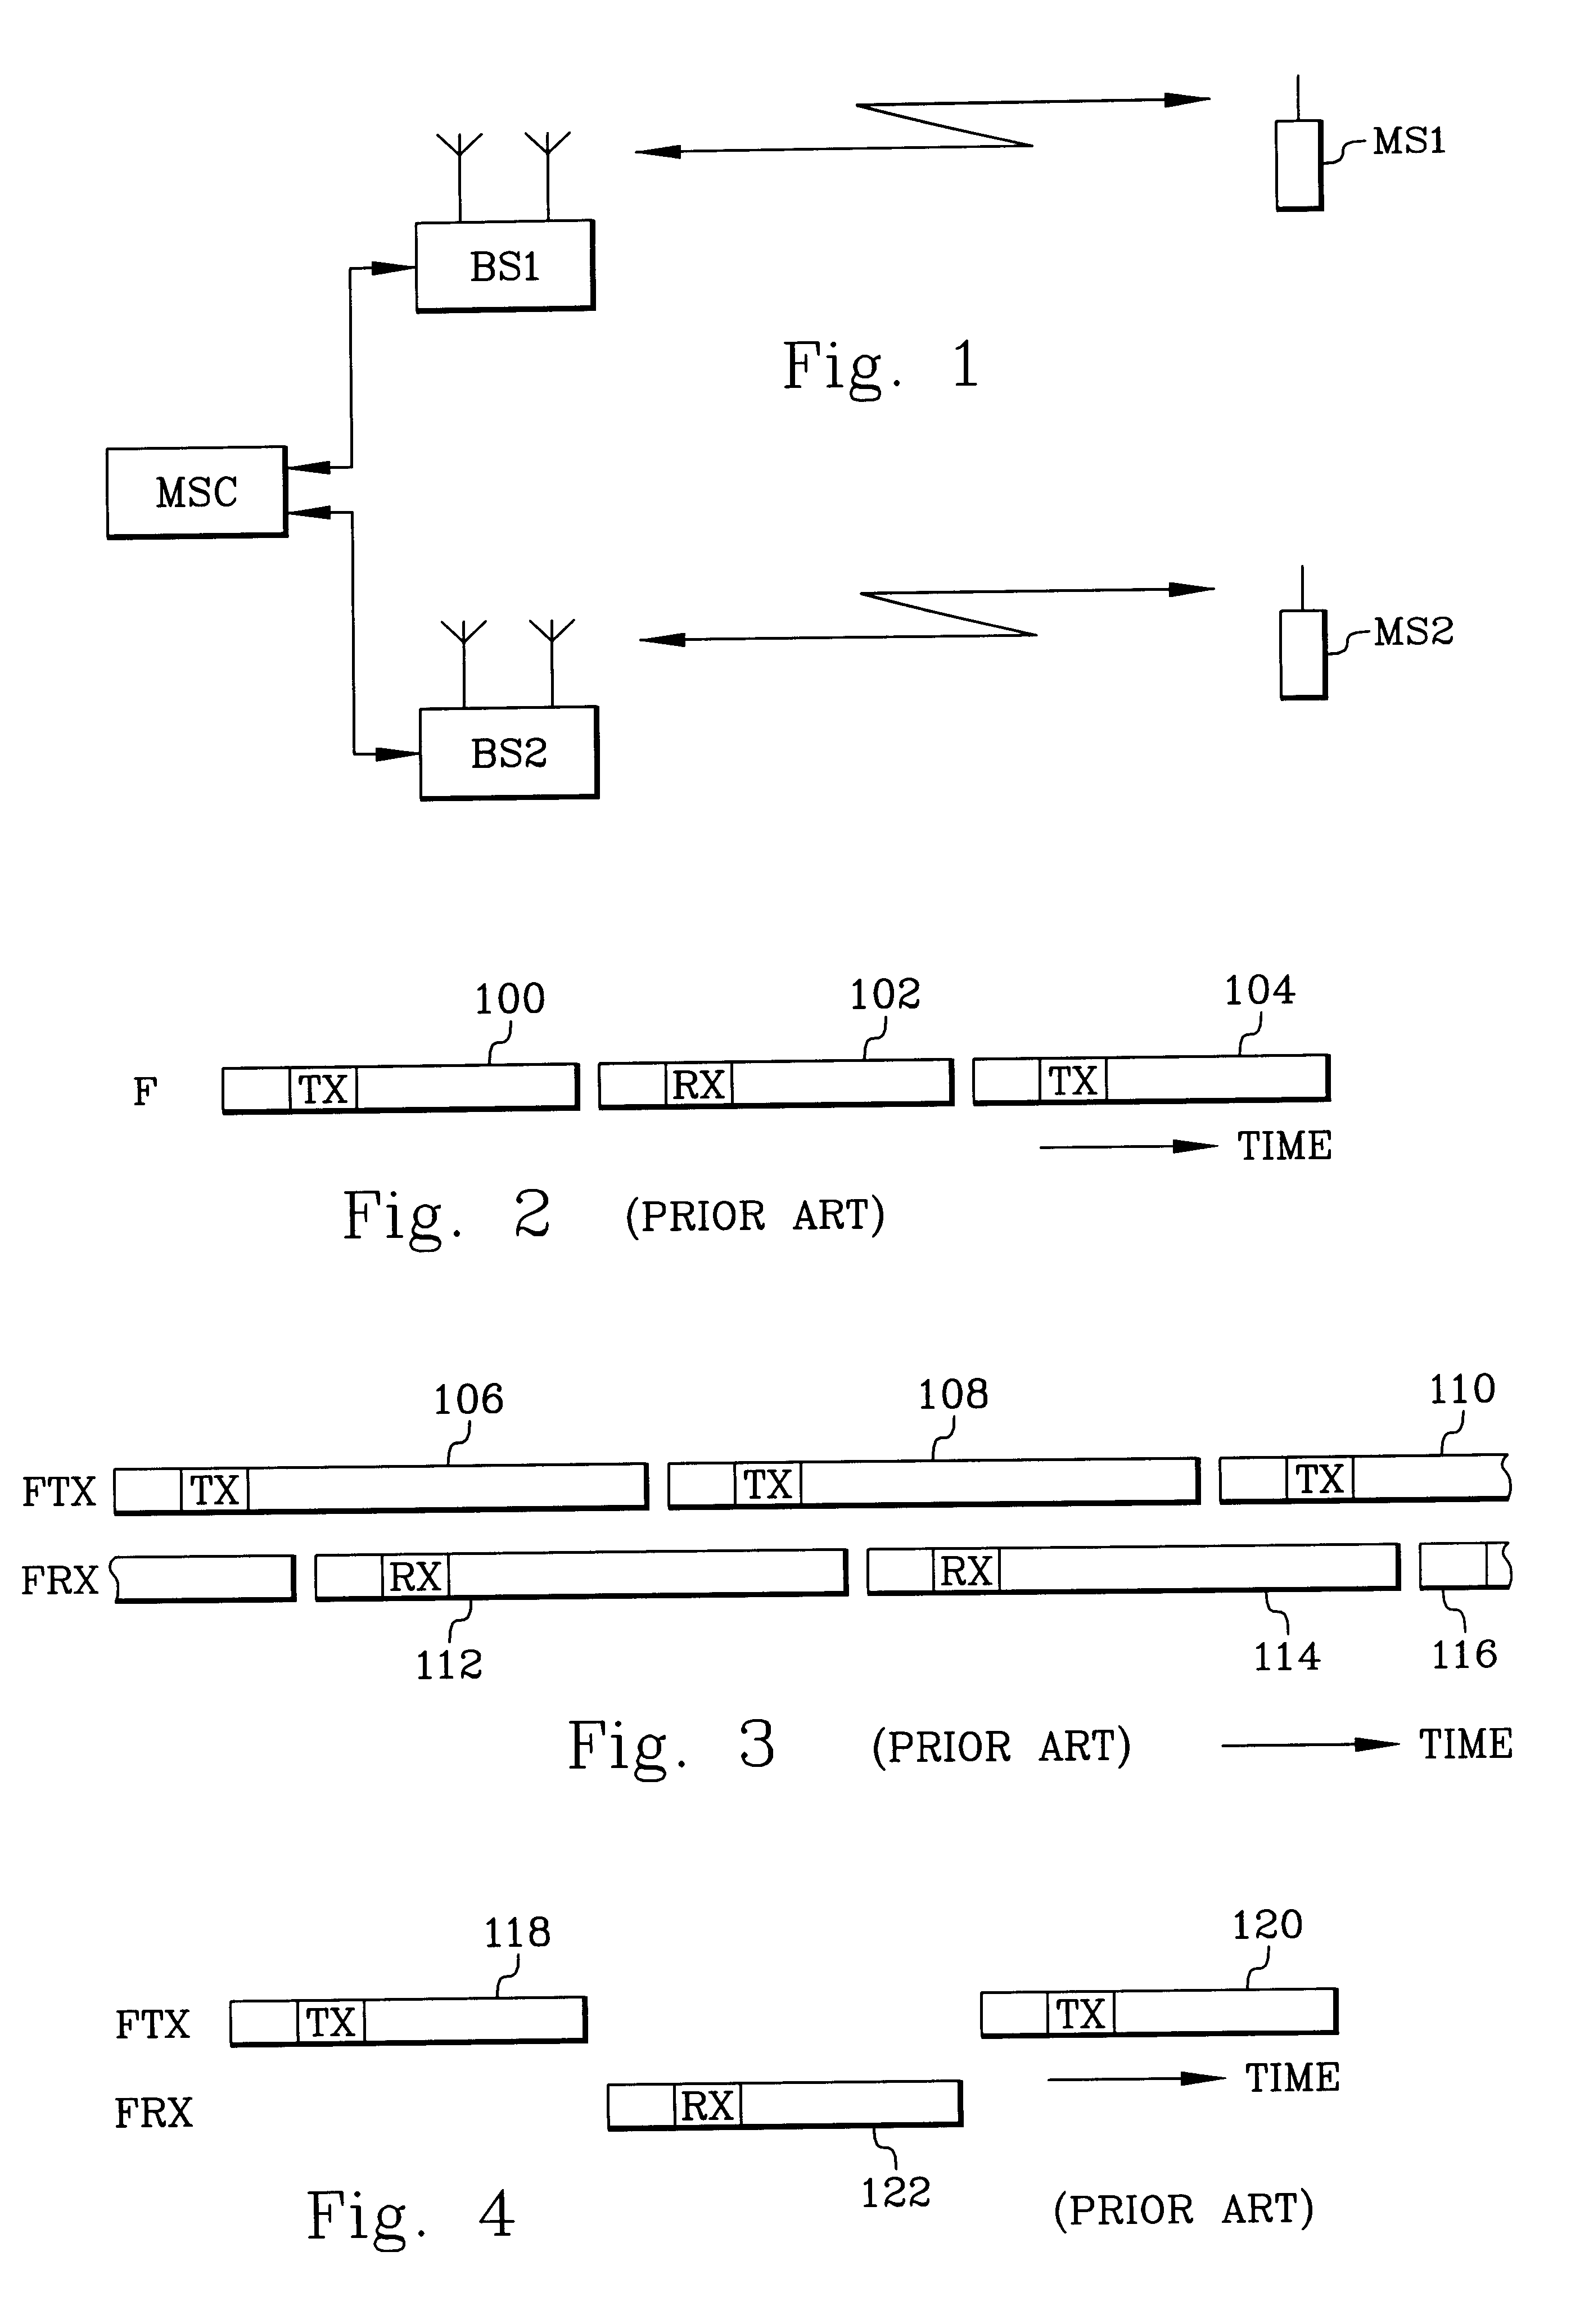 TDMA-TDD/FDD radio communication system and channel selection method and apparatus for such a system